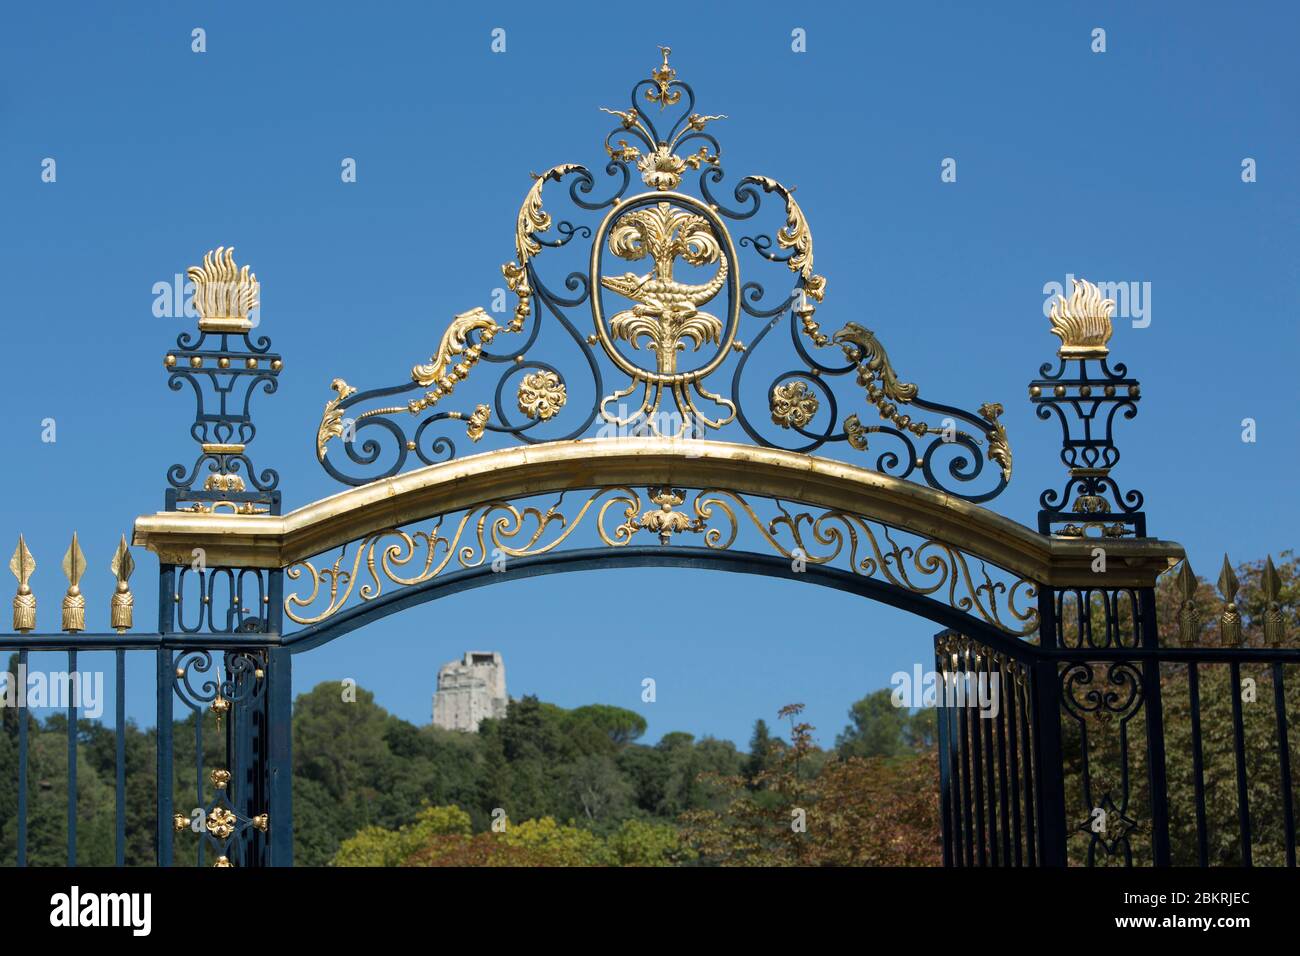 France, Gard, Nimes, Fontaine gardens, wrought iron gate gilded with gold and Magne tower Stock Photo